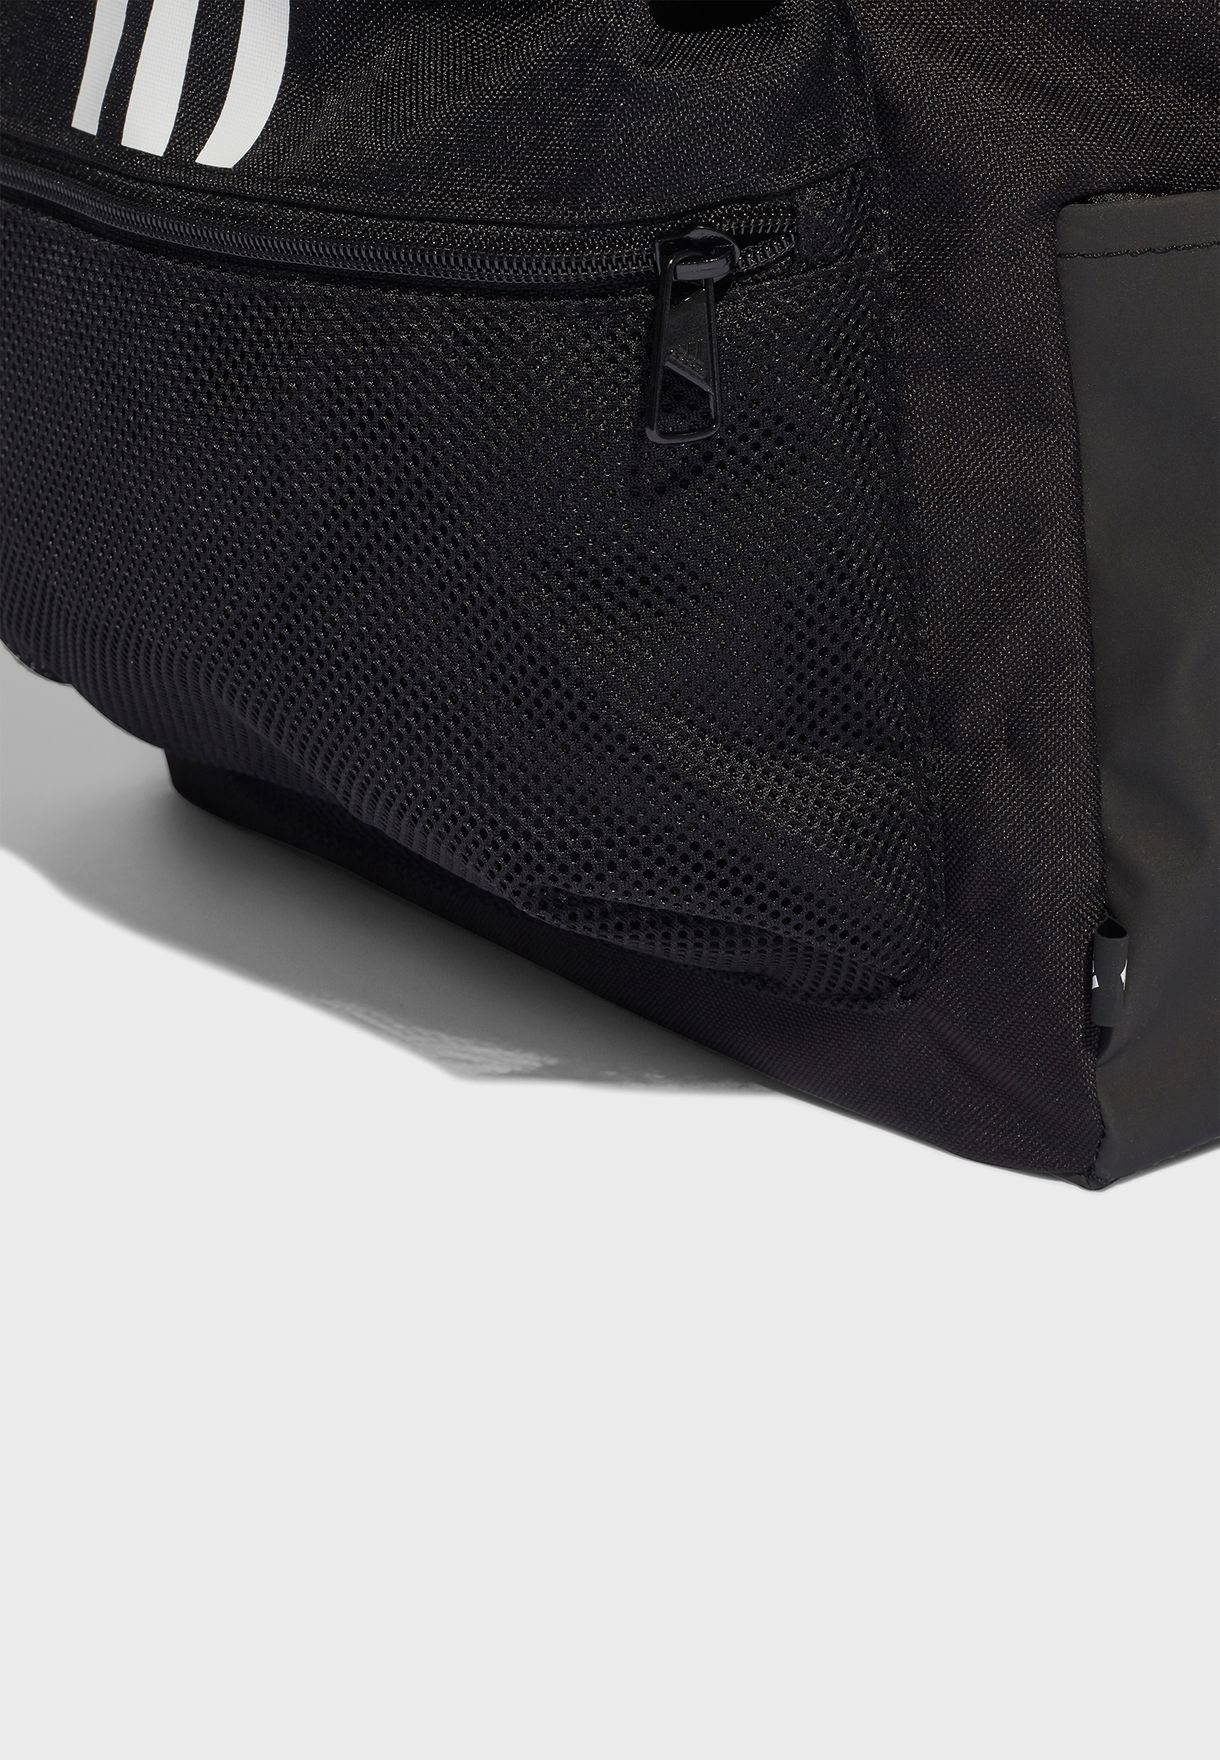 Classic Bos 3 Stripes Backpack